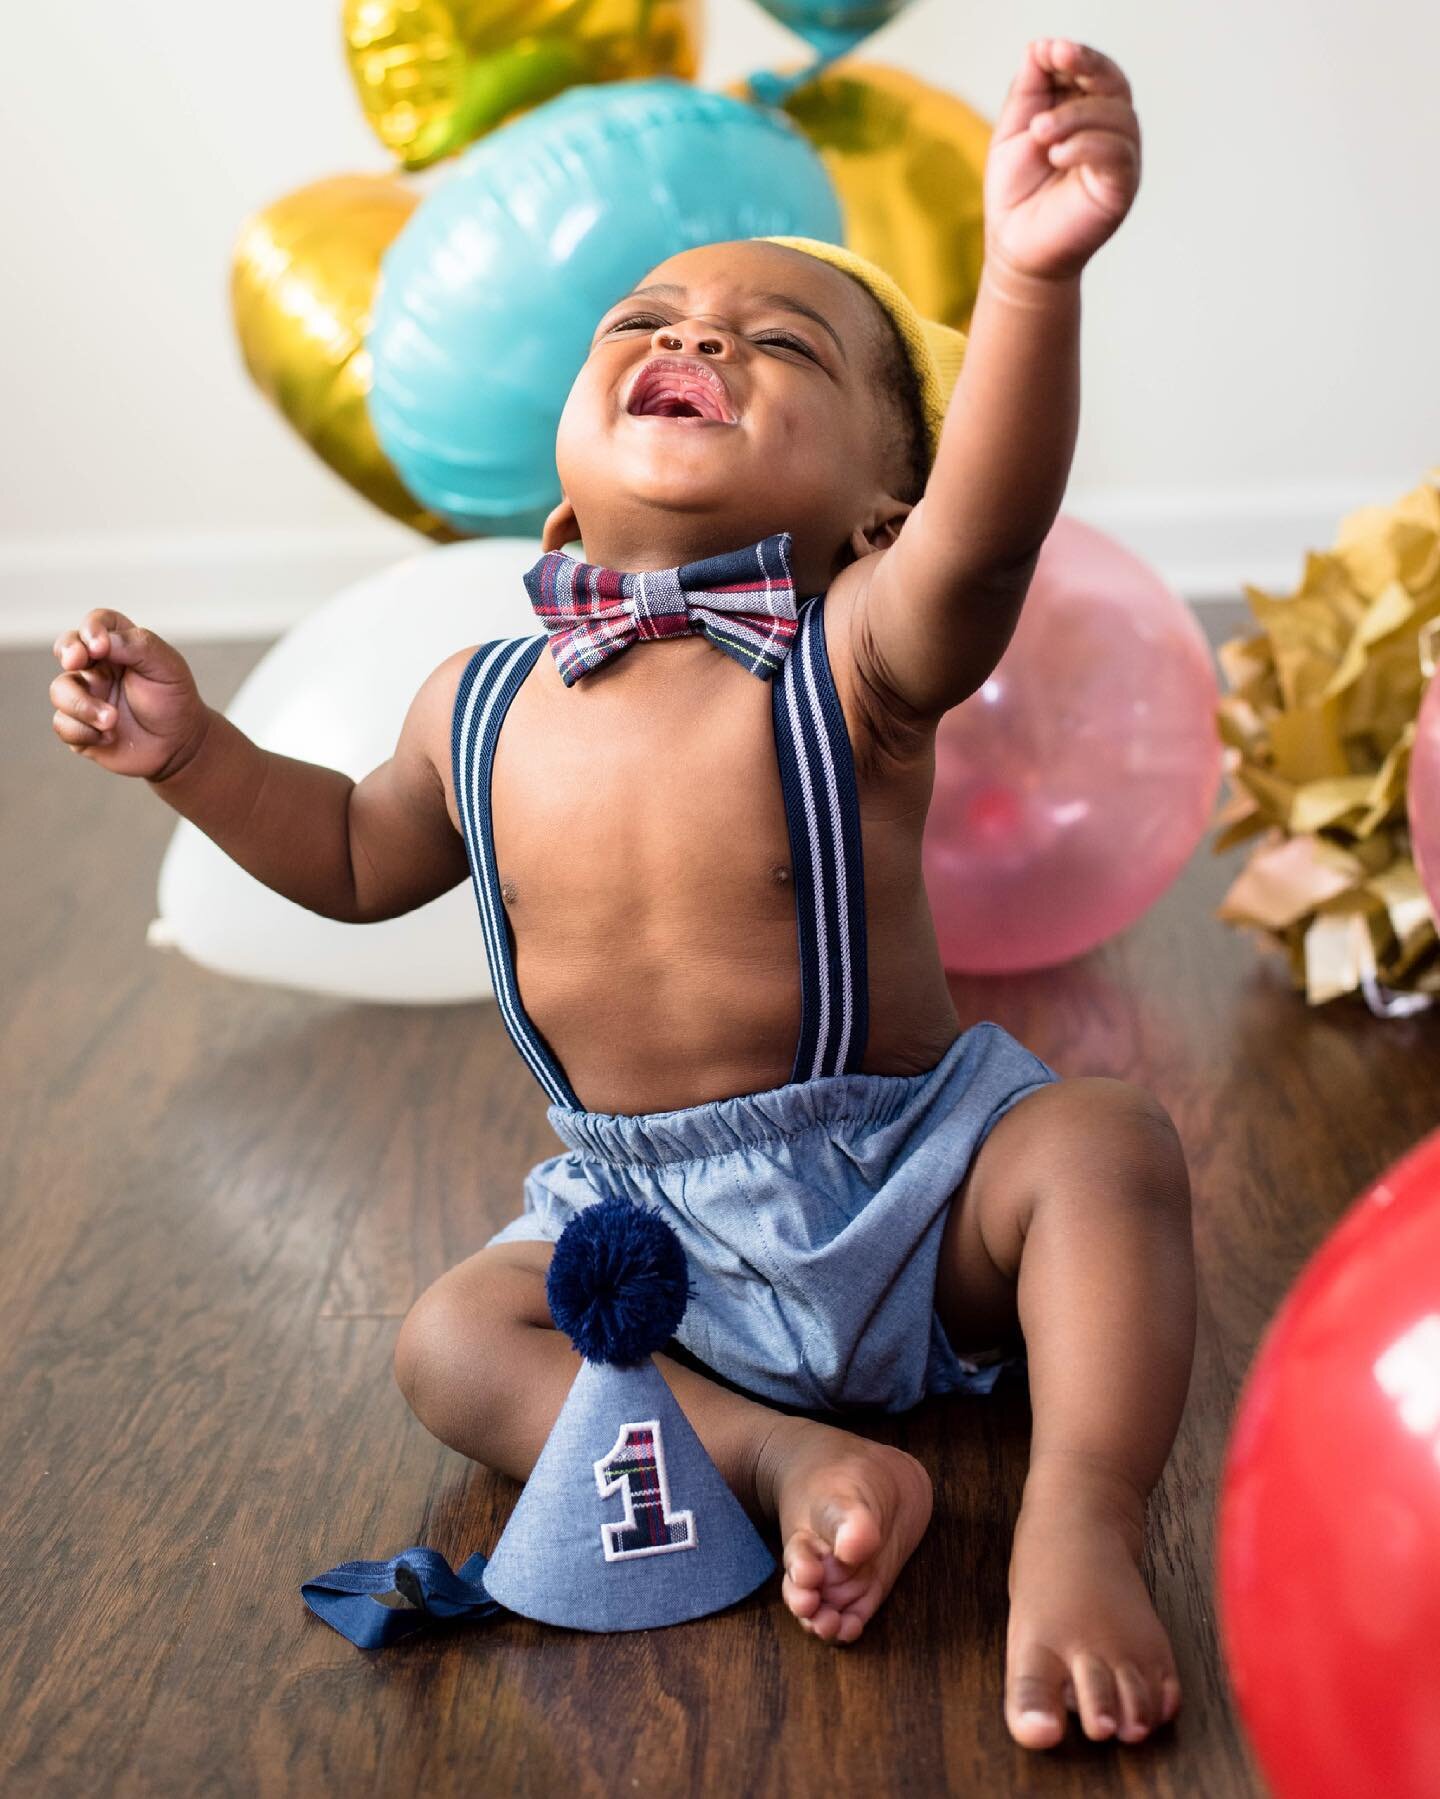 Happy Birthday Kam!! It&rsquo;s been so amazing watching him grow through my lens! The first time we meet, you were still in your mom&rsquo;s stomach&hellip;now you&rsquo;re 1 trying to take over the world! Time is flying! The cake smash session was 